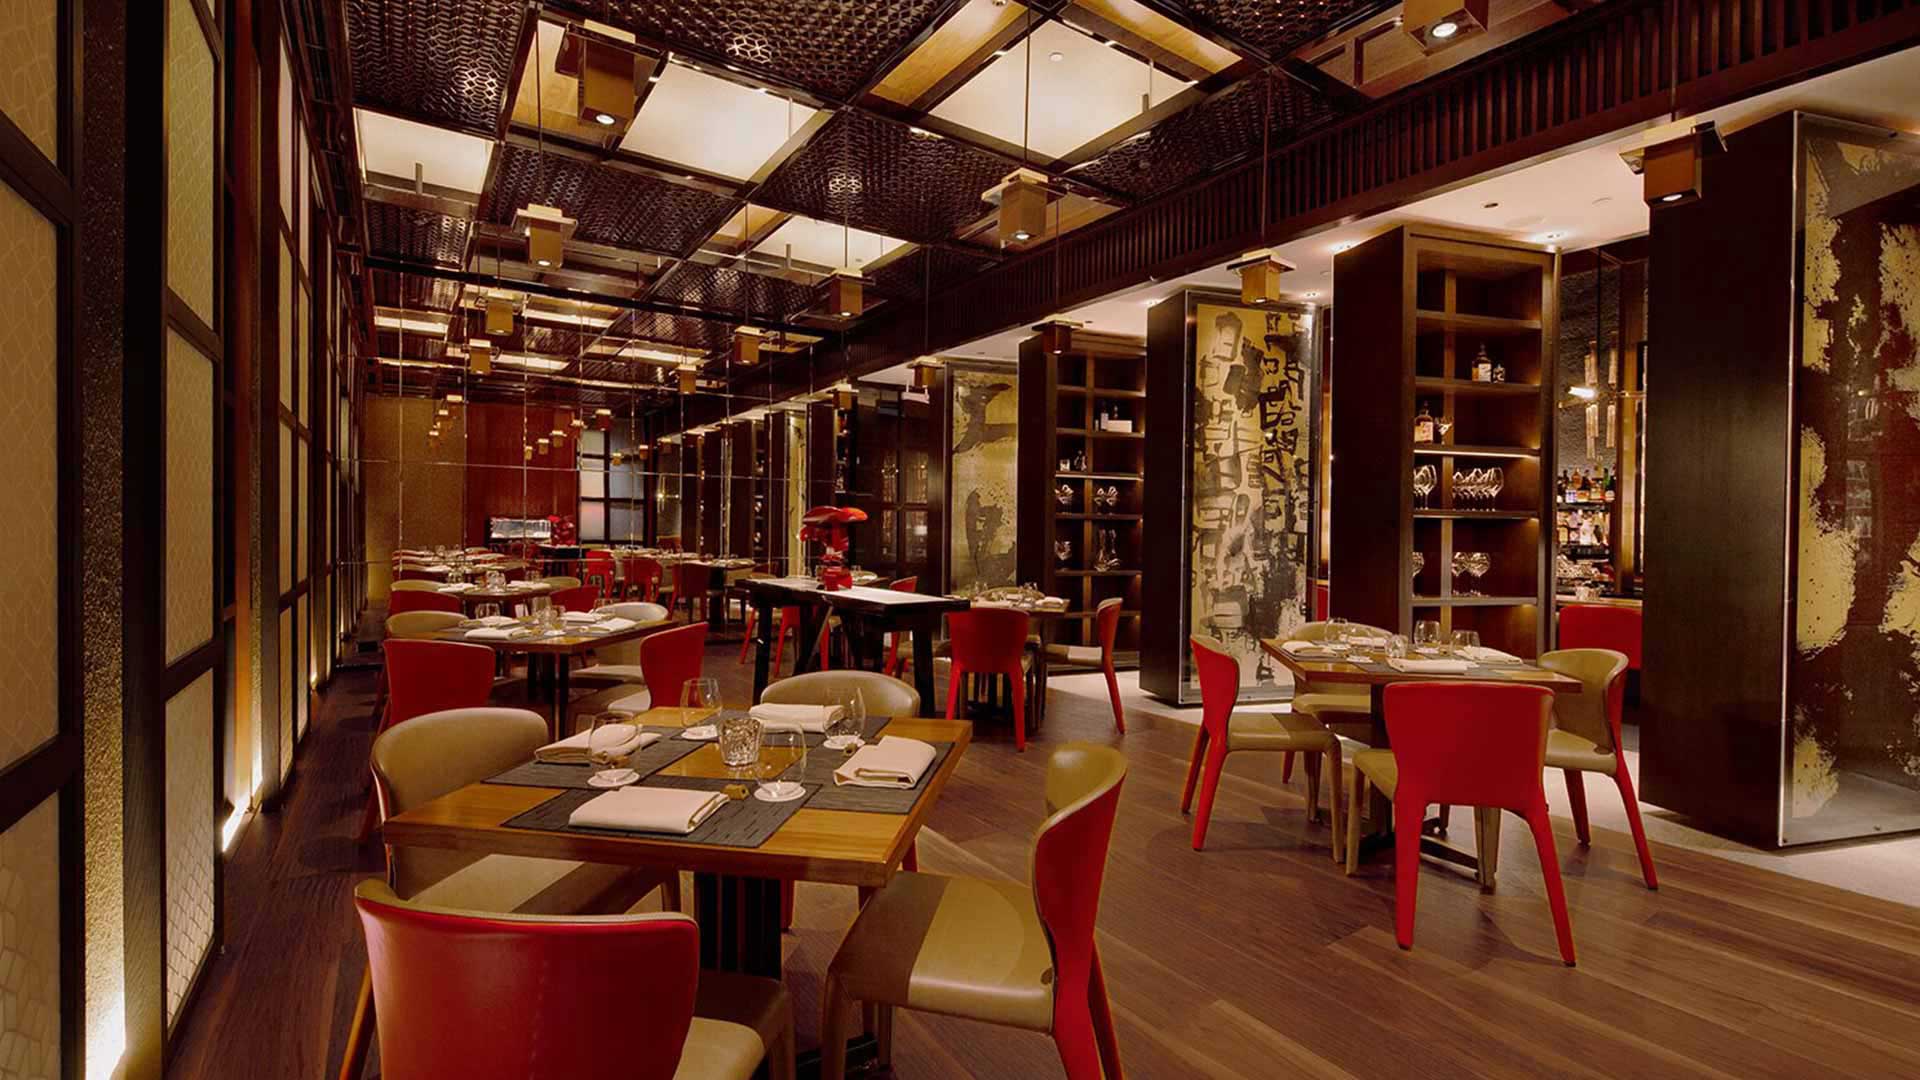 Main dining hall at Waku Ghin, a michelin star restaurant in Singapore to hold private events and meeting